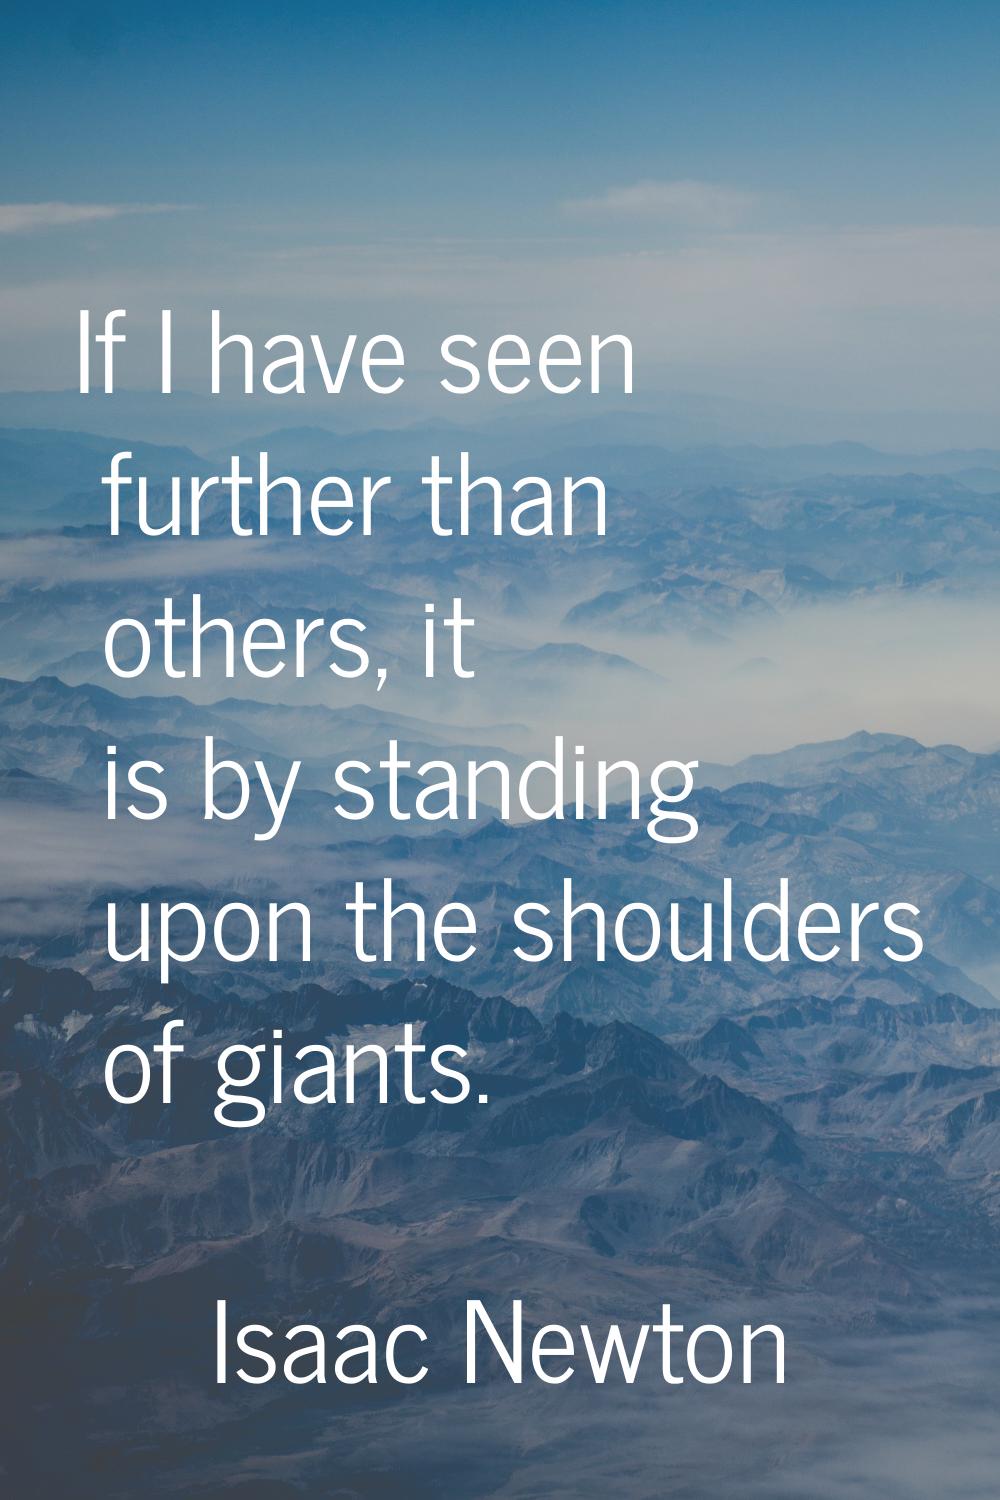 If I have seen further than others, it is by standing upon the shoulders of giants.